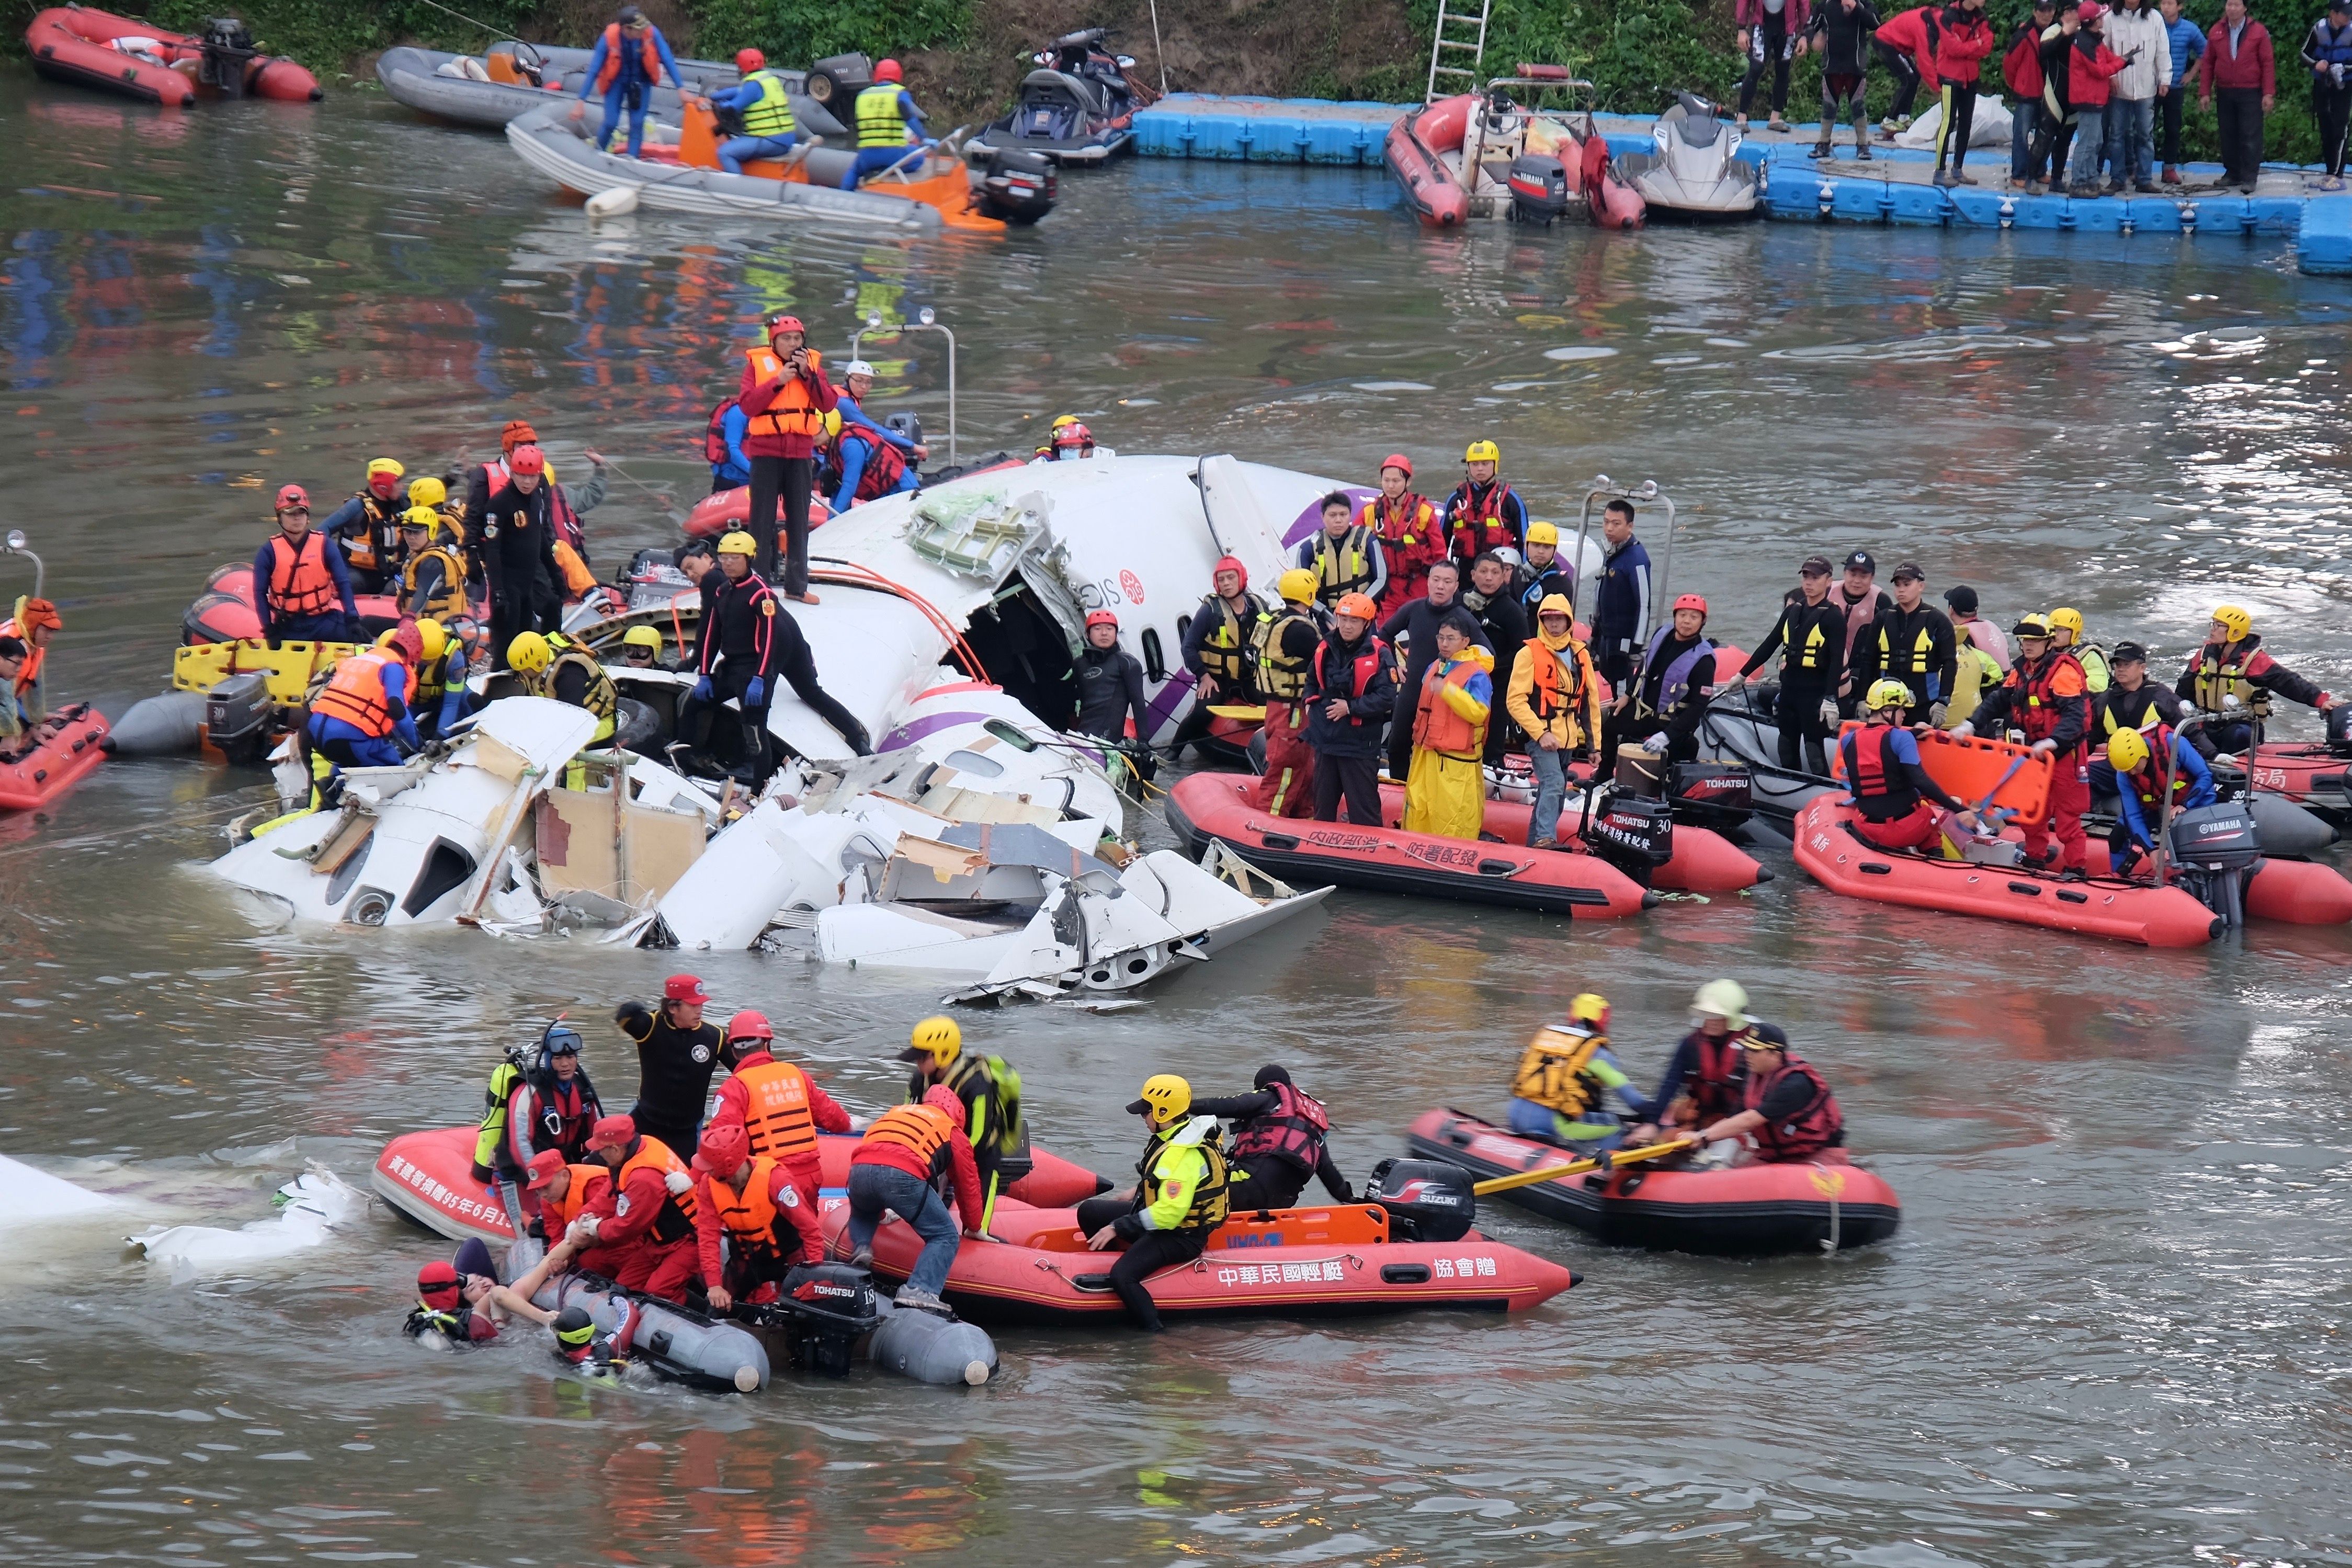 Survivors being rescued from a river after TransAsia Airways Flight 235 crashed.